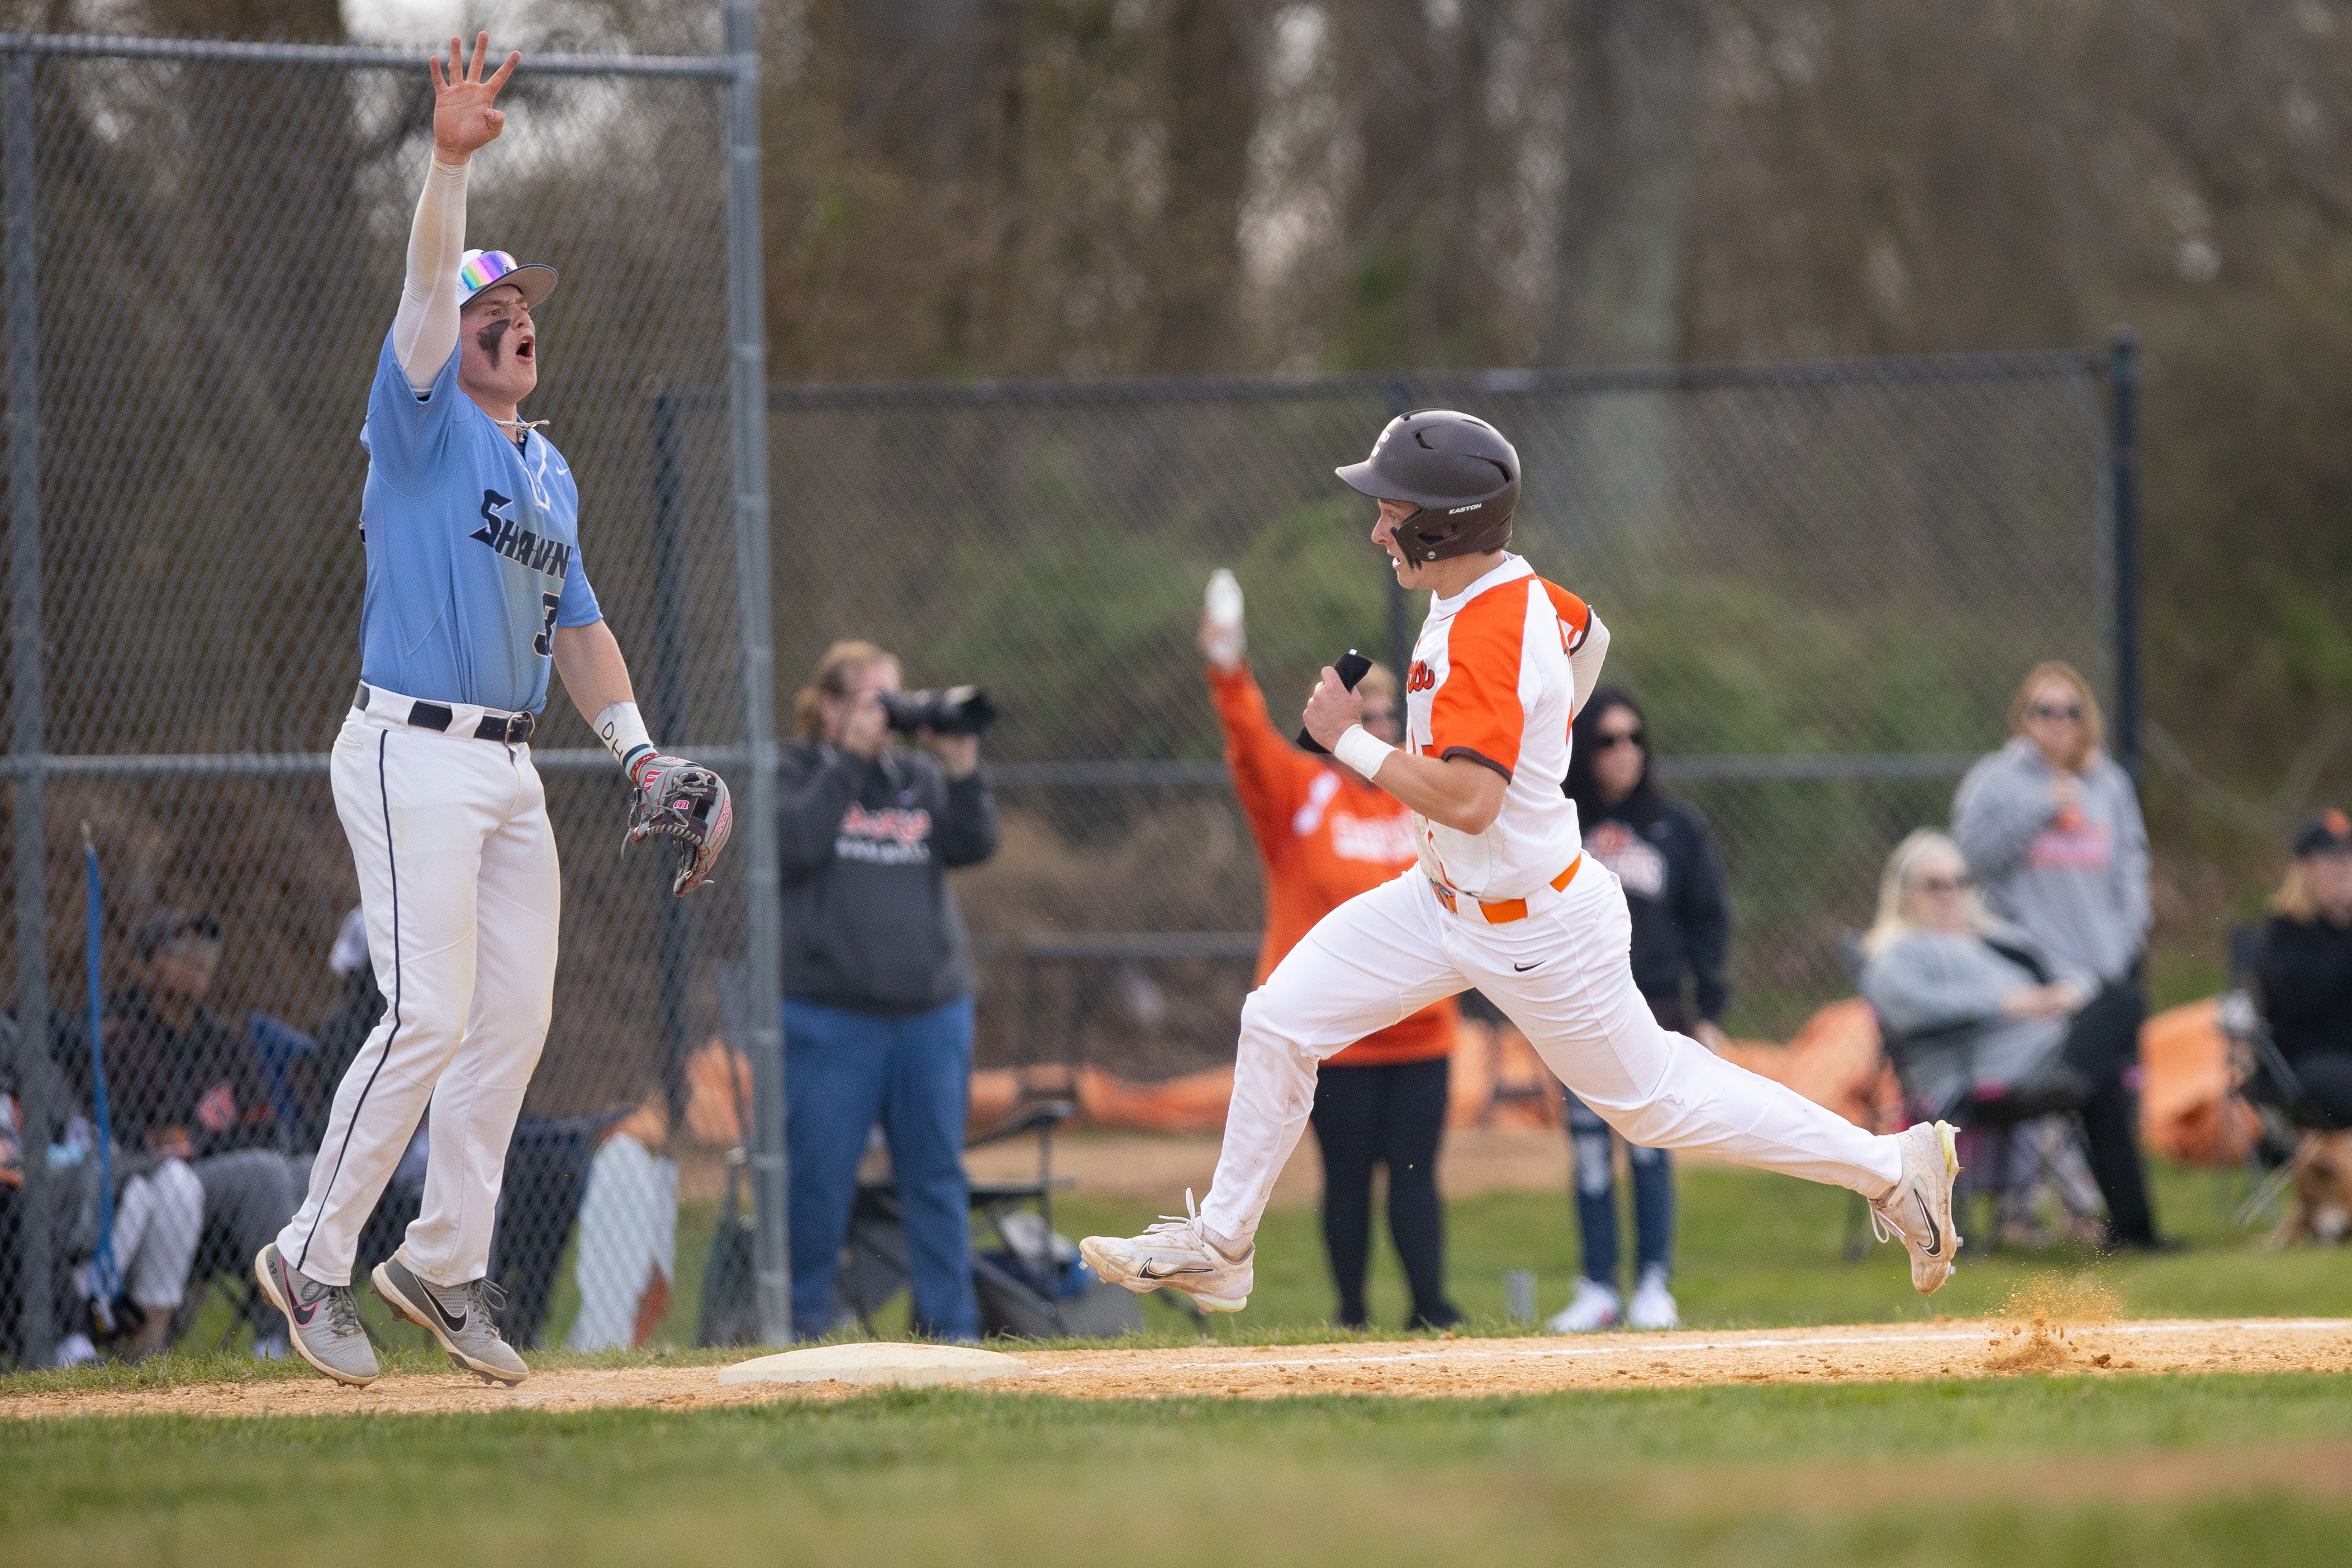 Brandon Prince (7) of Cherokee, turns on the jets as he rounds third in Marlton, NJ on Monday, April 3, 2023.